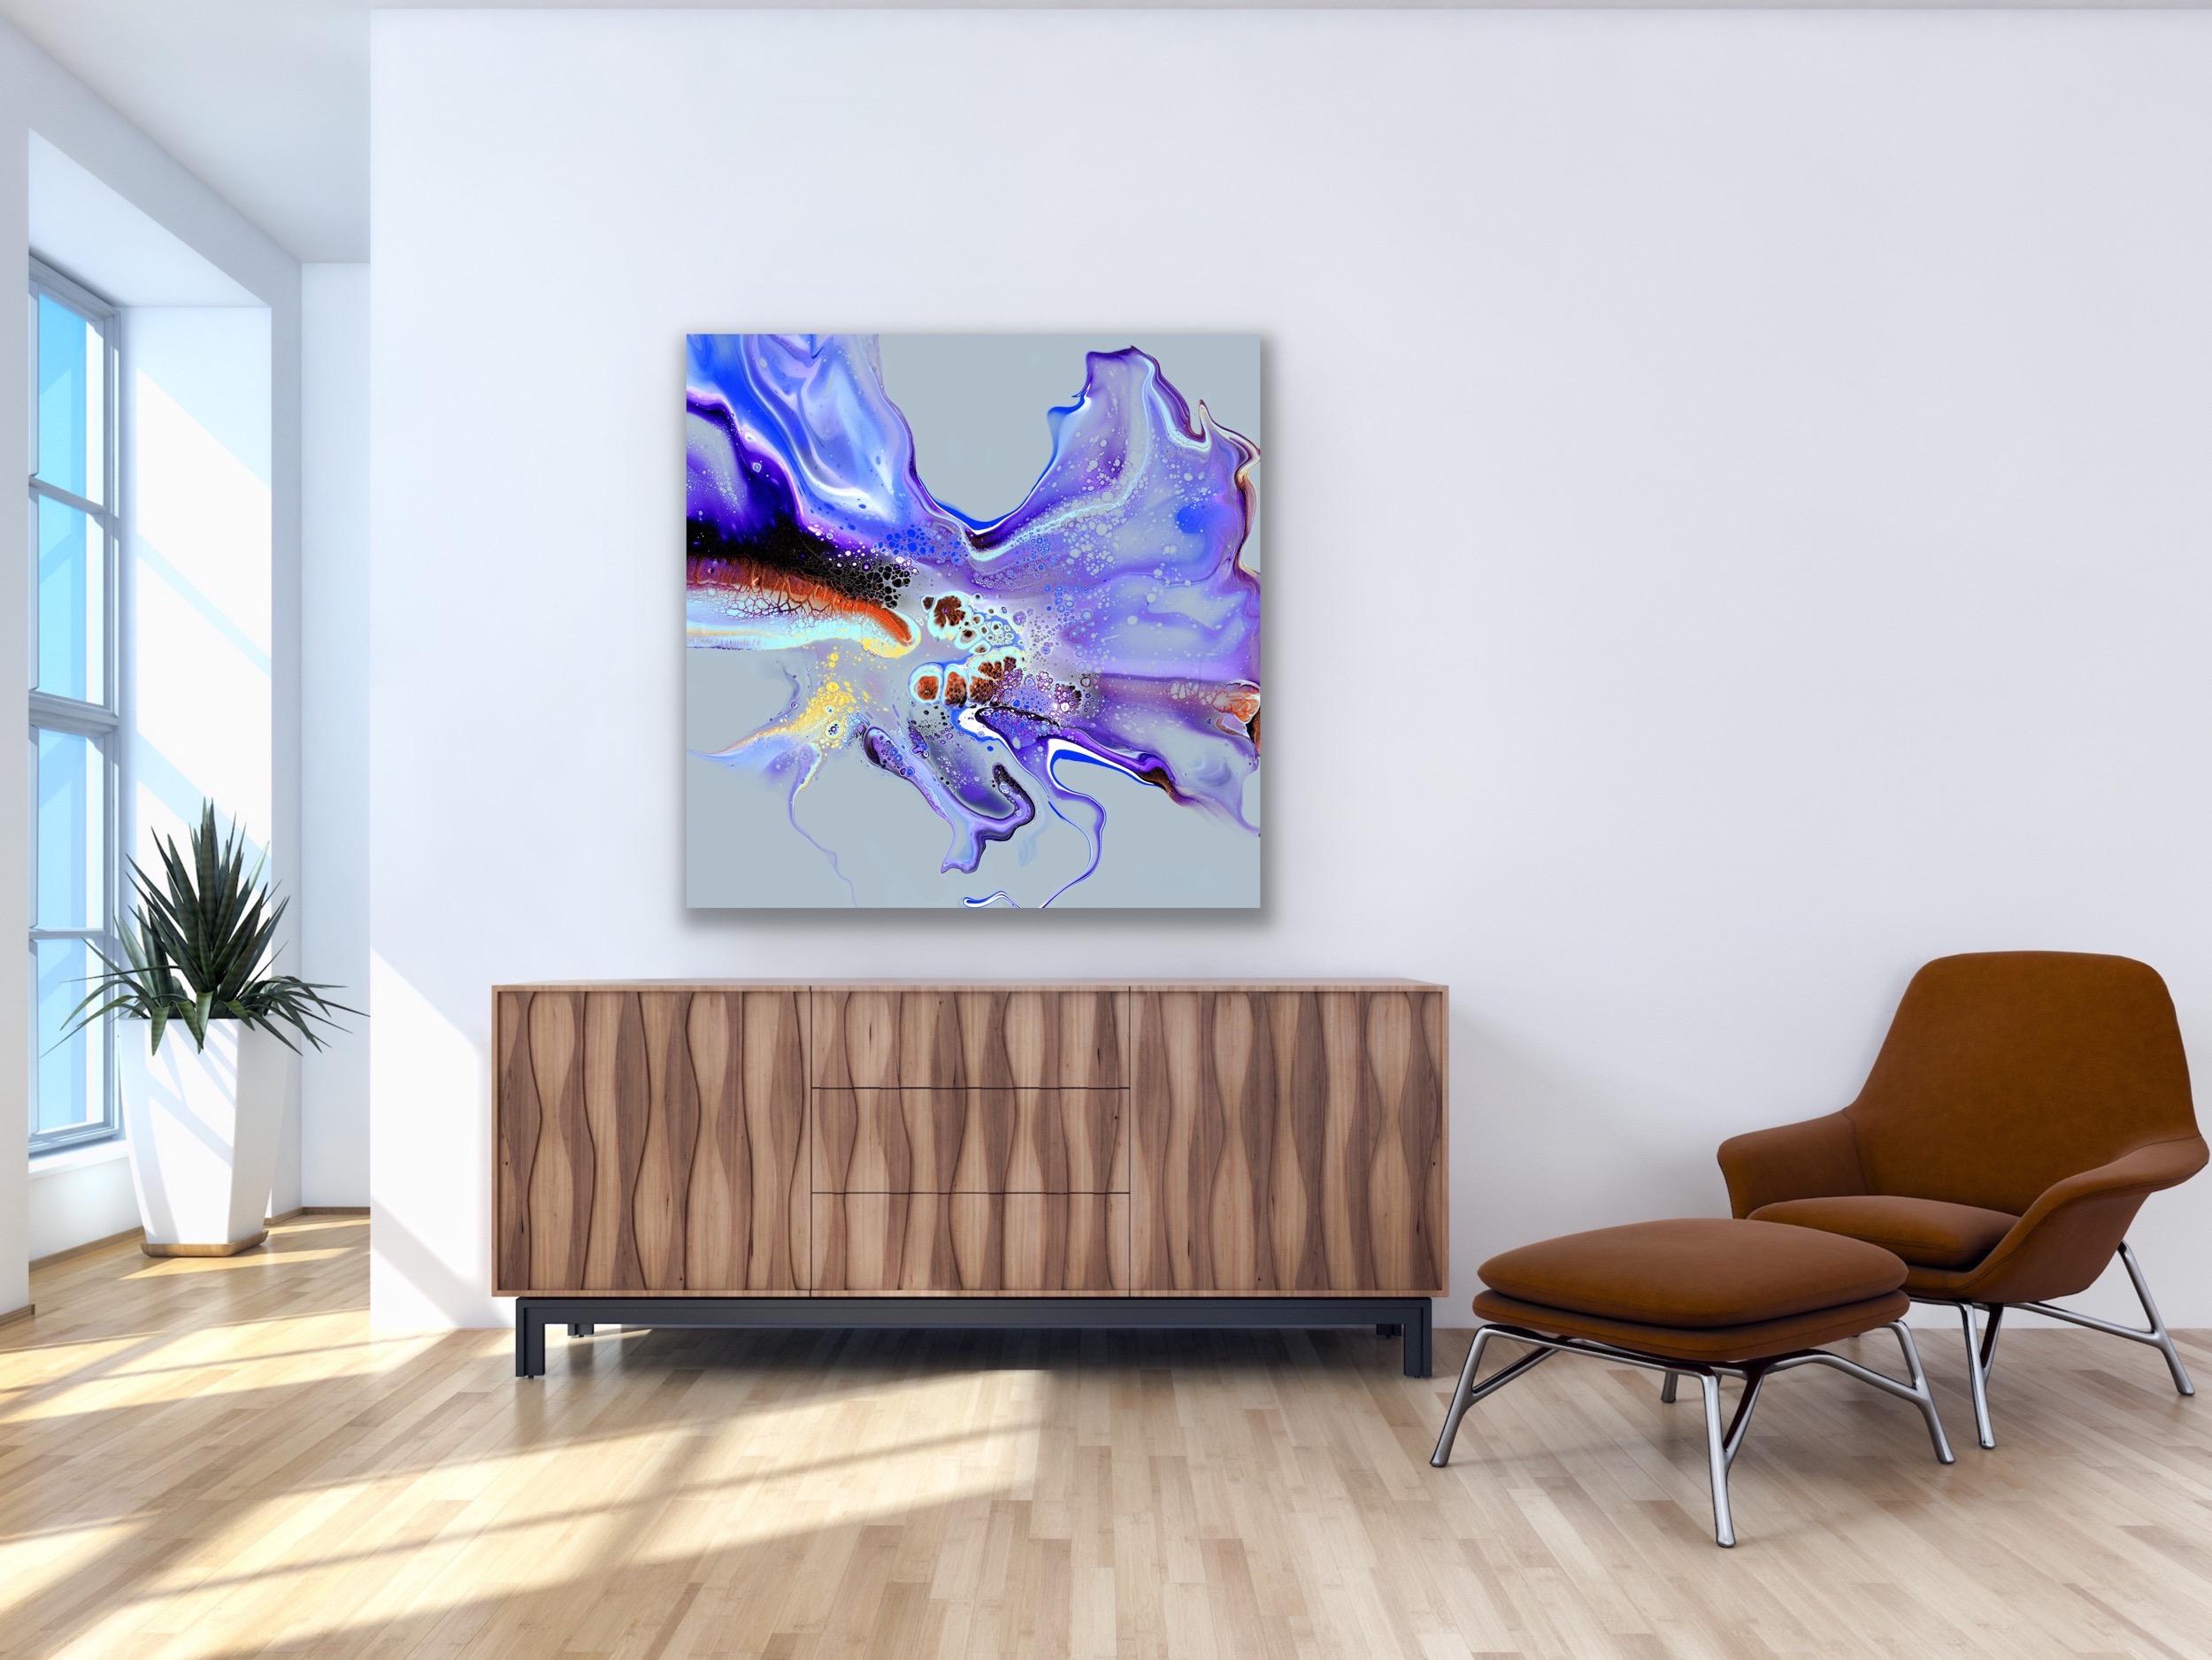 Modern Wall Art, Contemporary Decor, Large Indoor Outdoor Giclee Print on Metal - Abstract Painting by Celeste Reiter